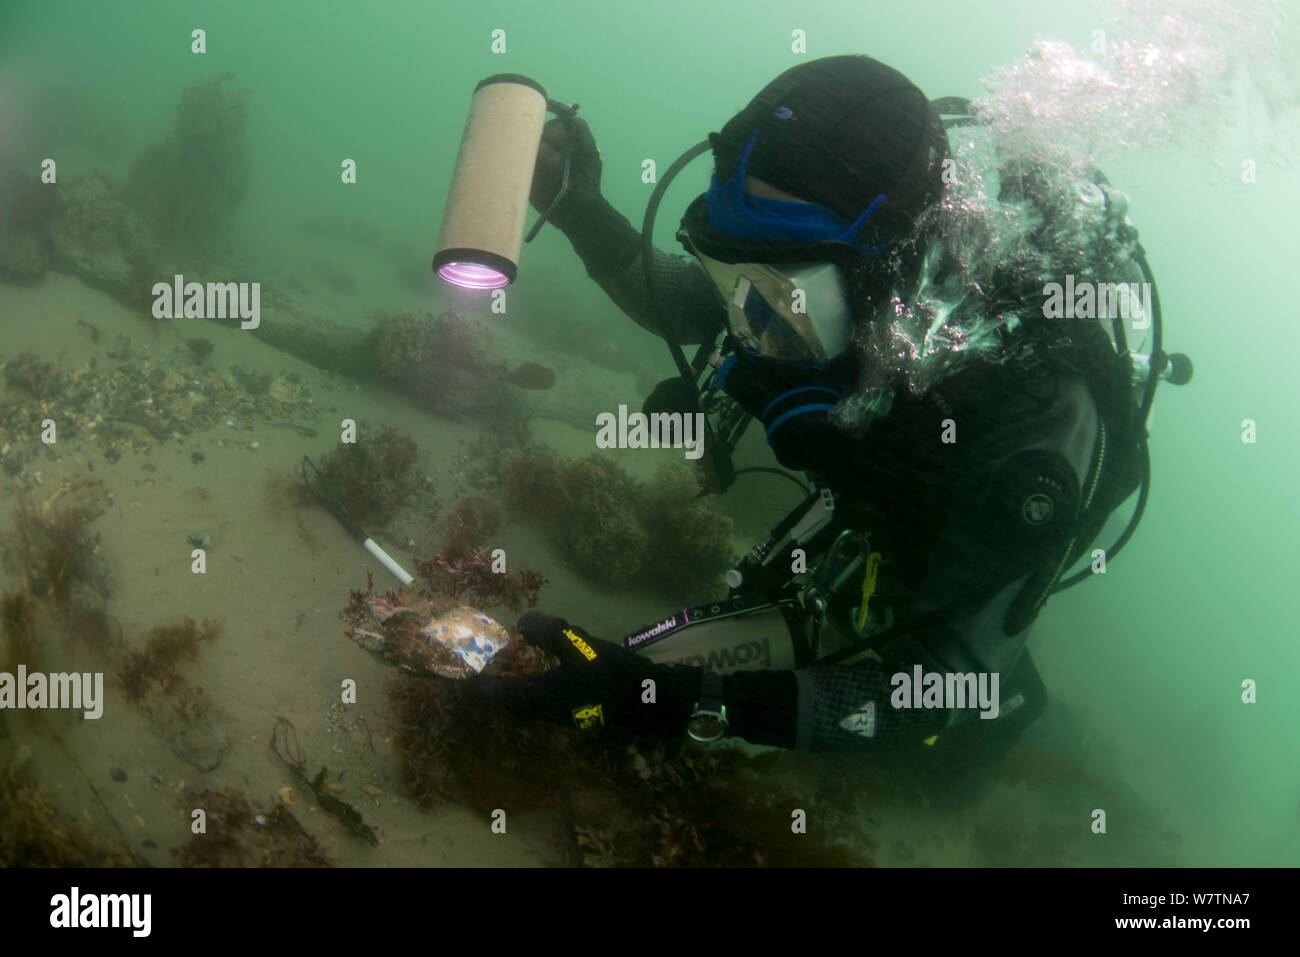 Maritime archaeologist examining fragment of porcelain on the wreck of the 1st Rate man-of-war, HMS Invincible - wrecked in 1758. Eastern Solent Channel. England, UK, August 2013. Stock Photo